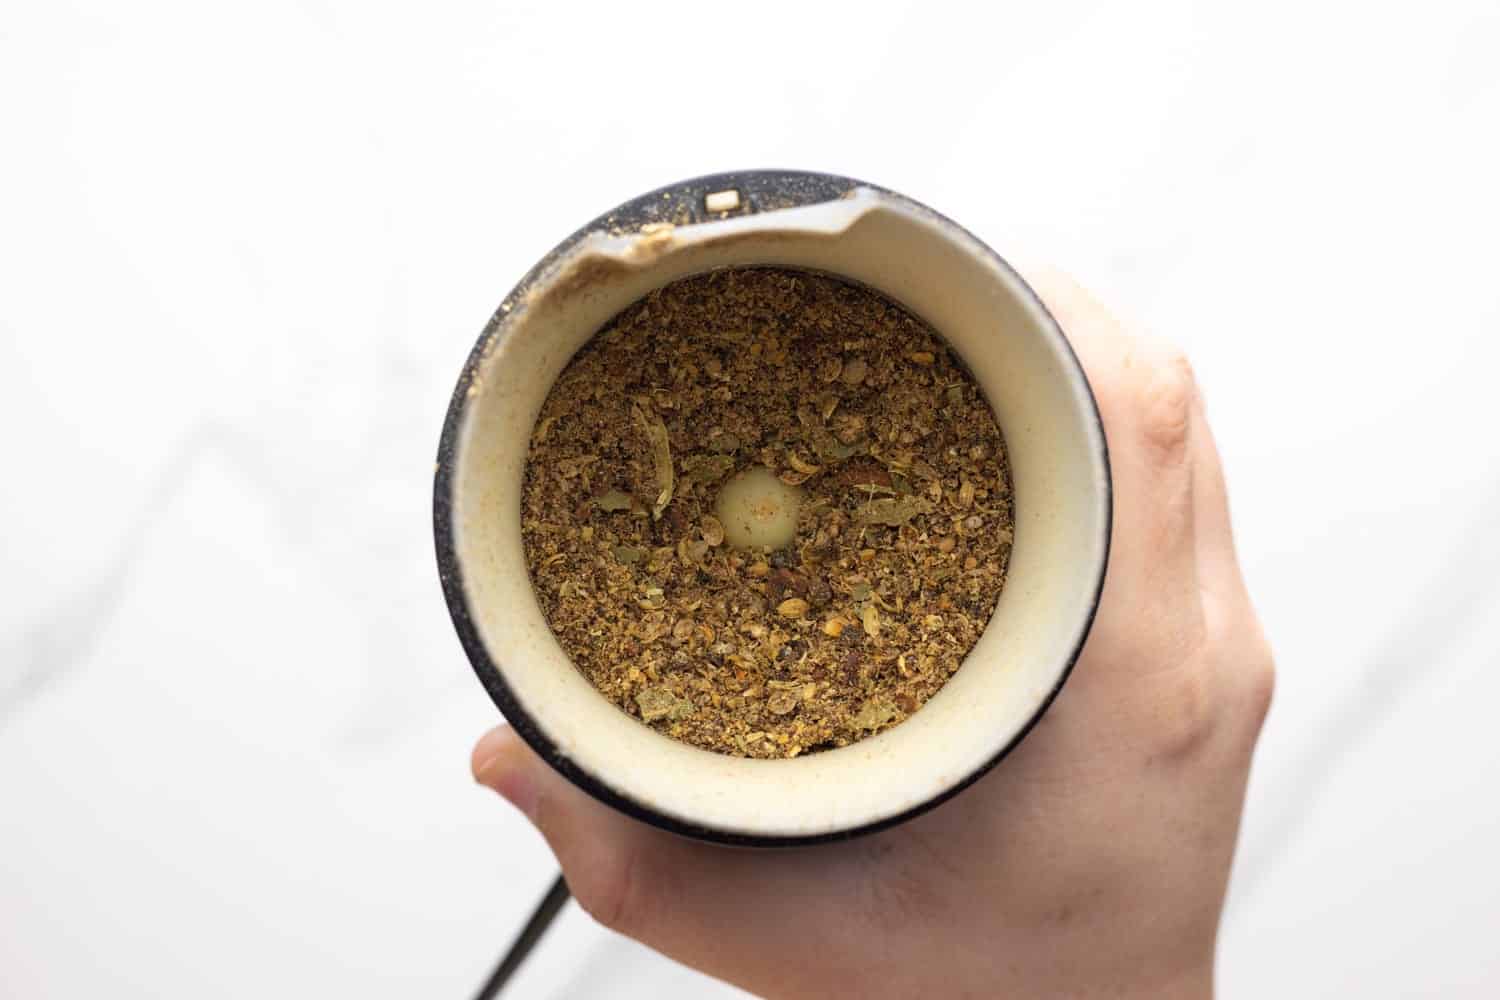 Grinding spices in a spice grinder